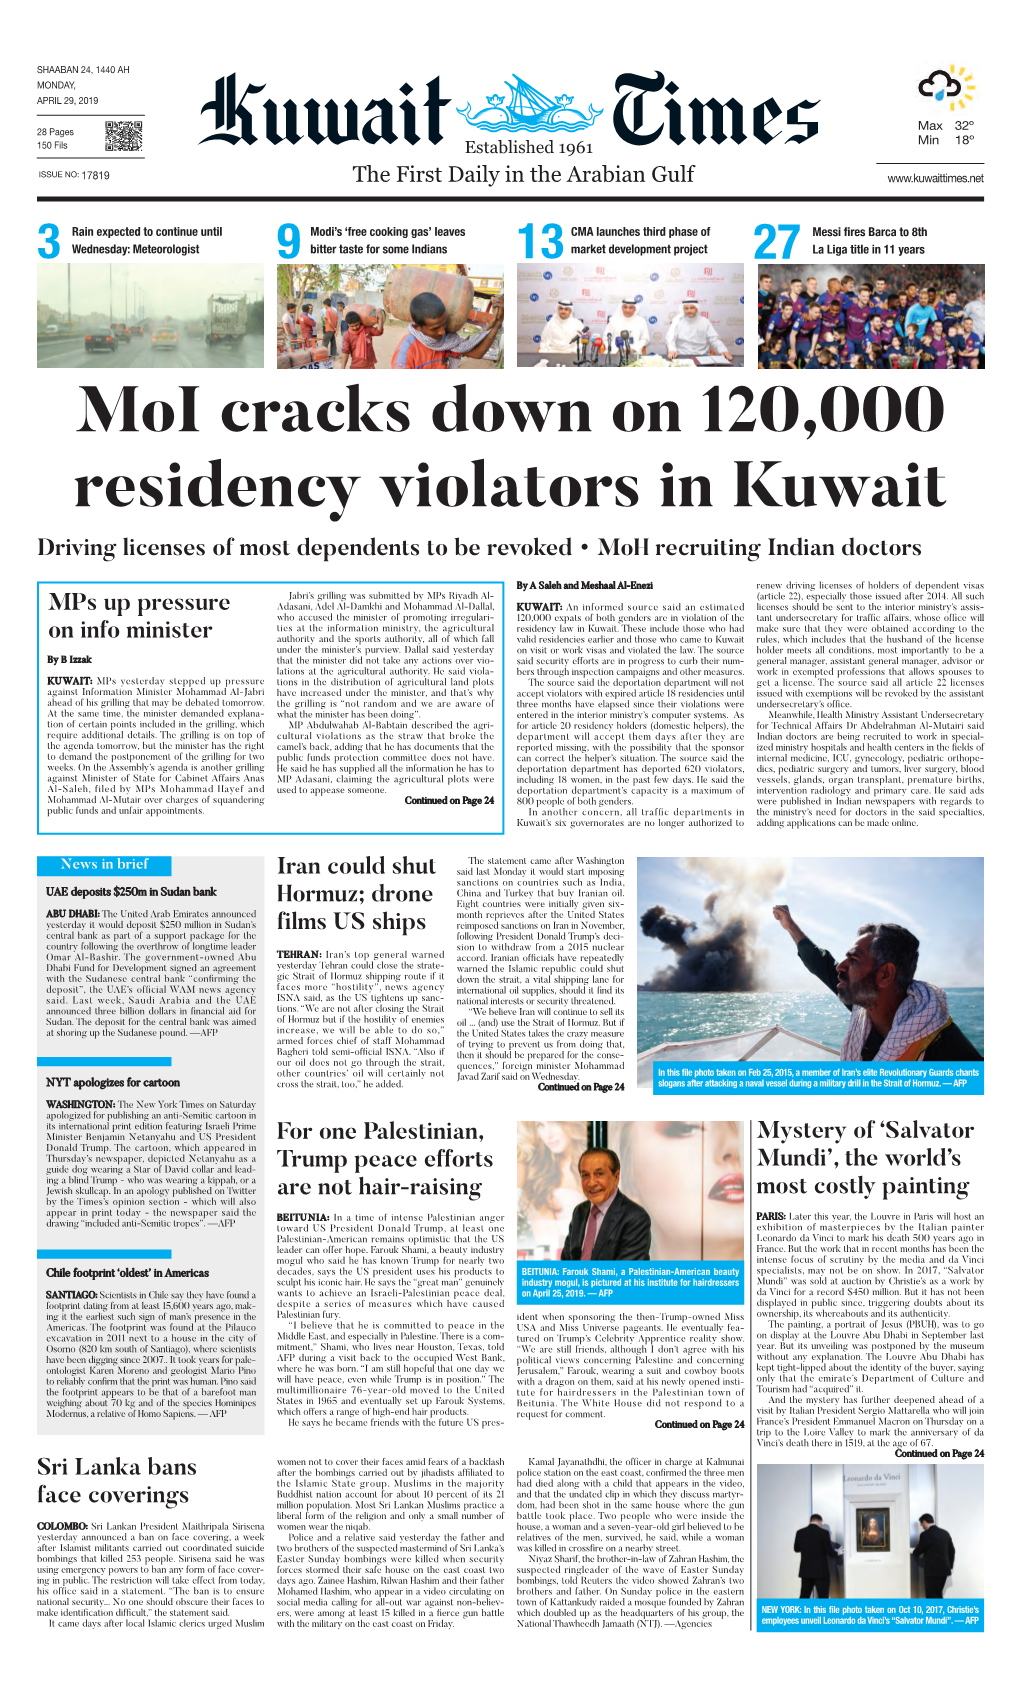 Moi Cracks Down on 120,000 Residency Violators in Kuwait Driving Licenses of Most Dependents to Be Revoked • Moh Recruiting Indian Doctors